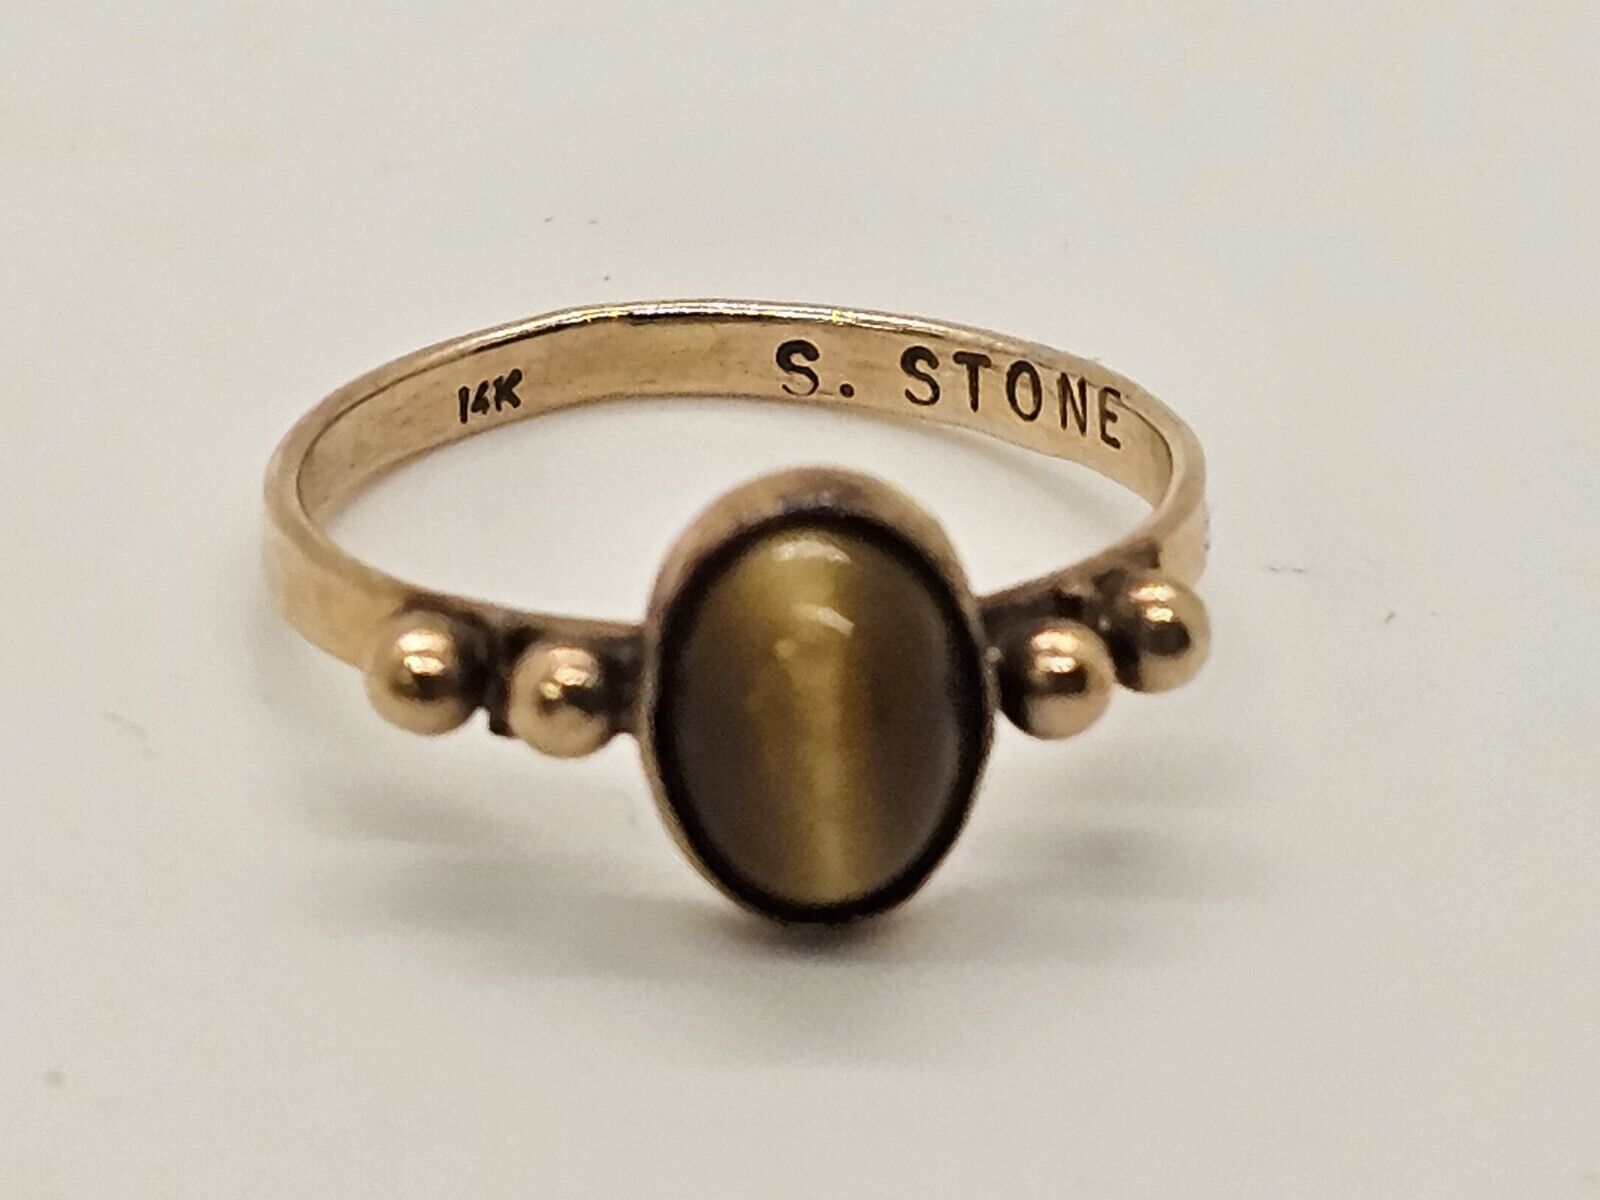 Vtg Women's 14k Yellow Gold Ring With Tiger’s Eye Stone Size 7, 2.2 Grams